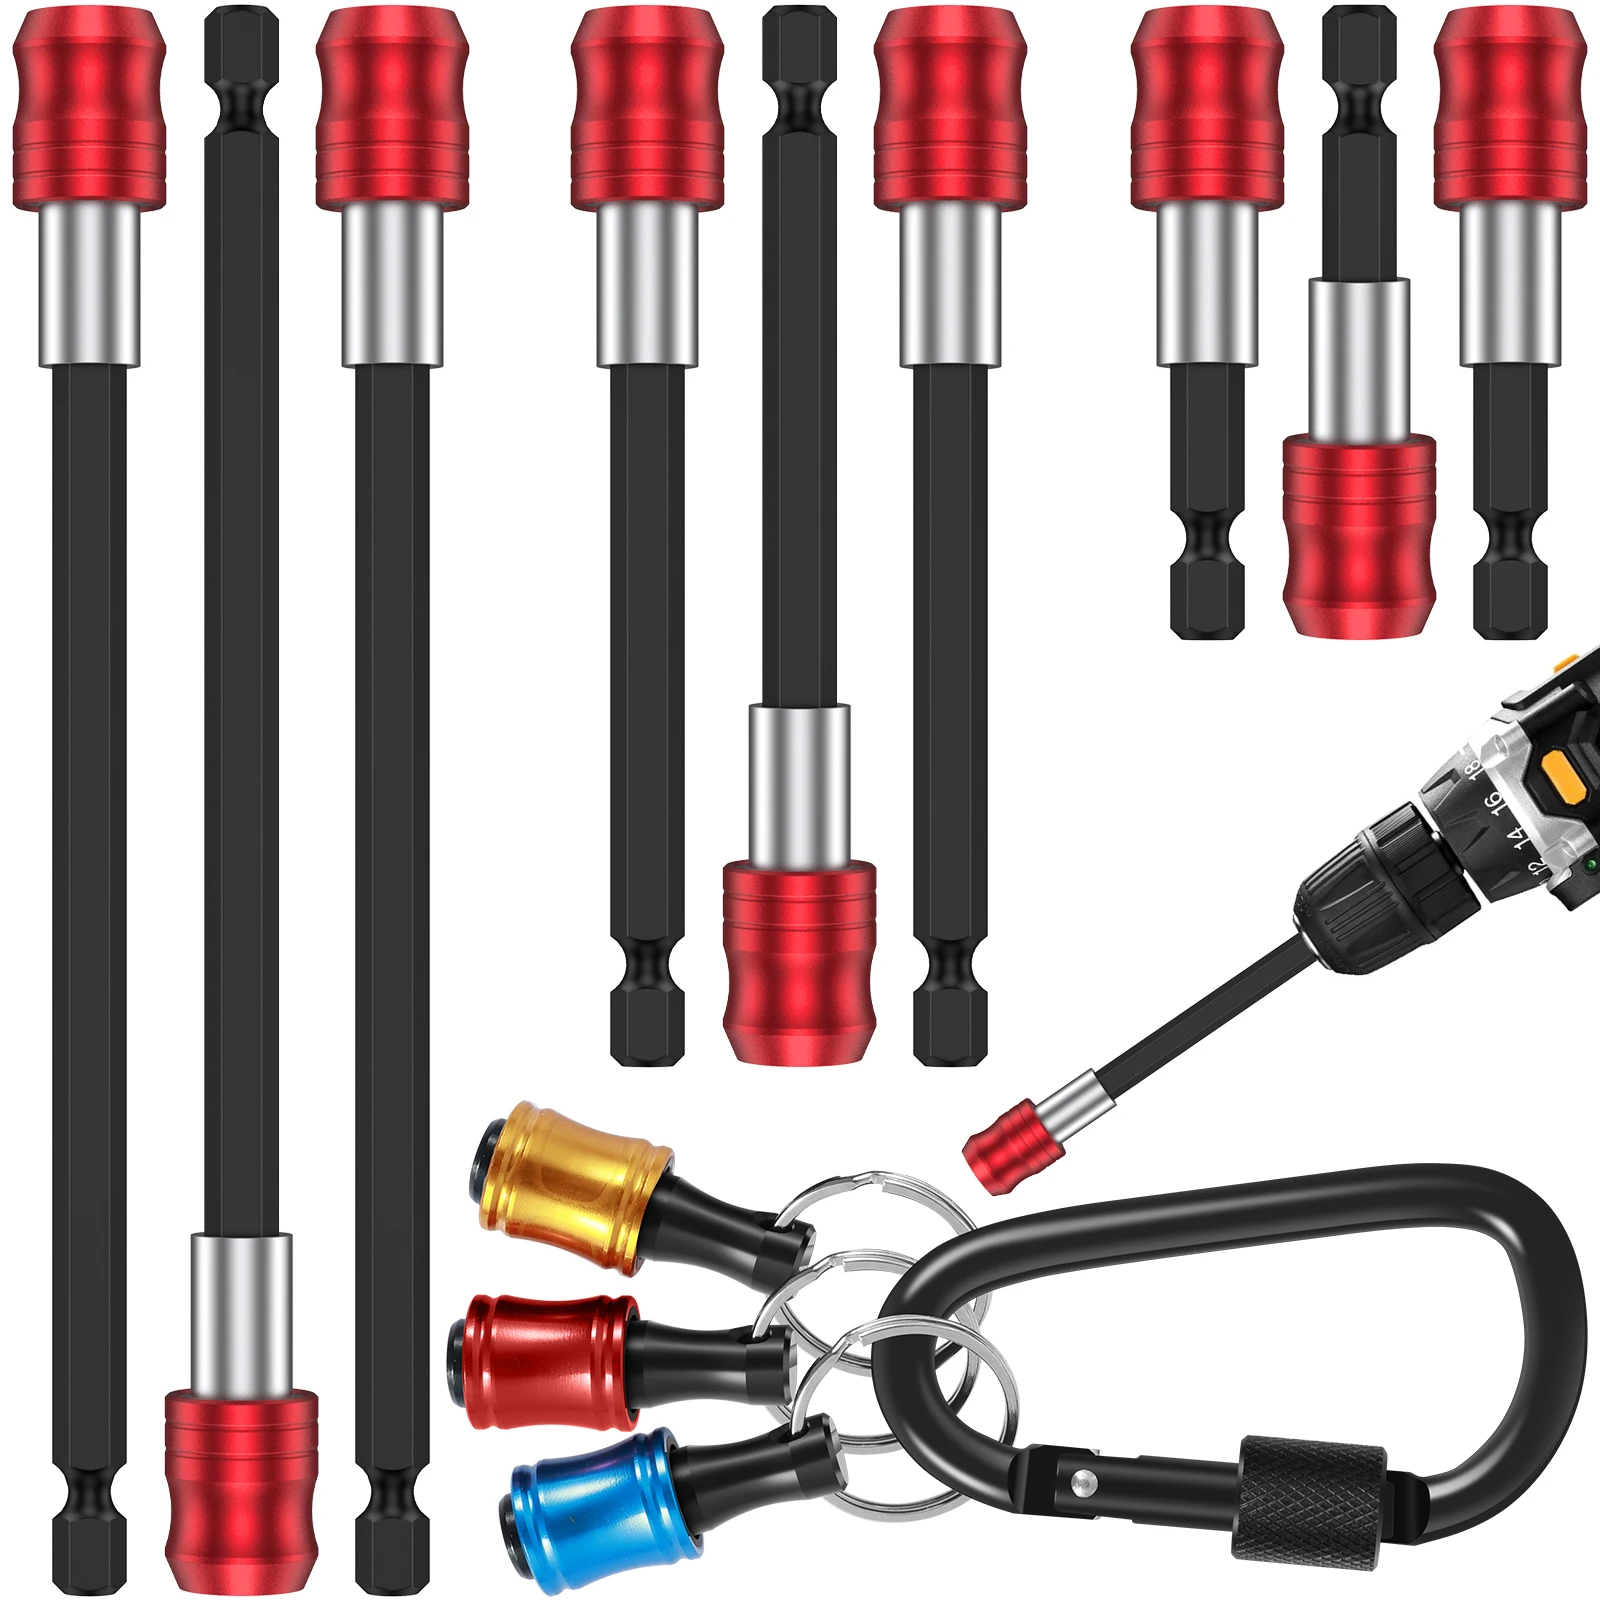 

New 12Pcs Drill Bit Extension and Bit Holder Keychain Set with Carabiner Magnetic 1/4 Inch Hex Shank Drill Extension Bit Holder